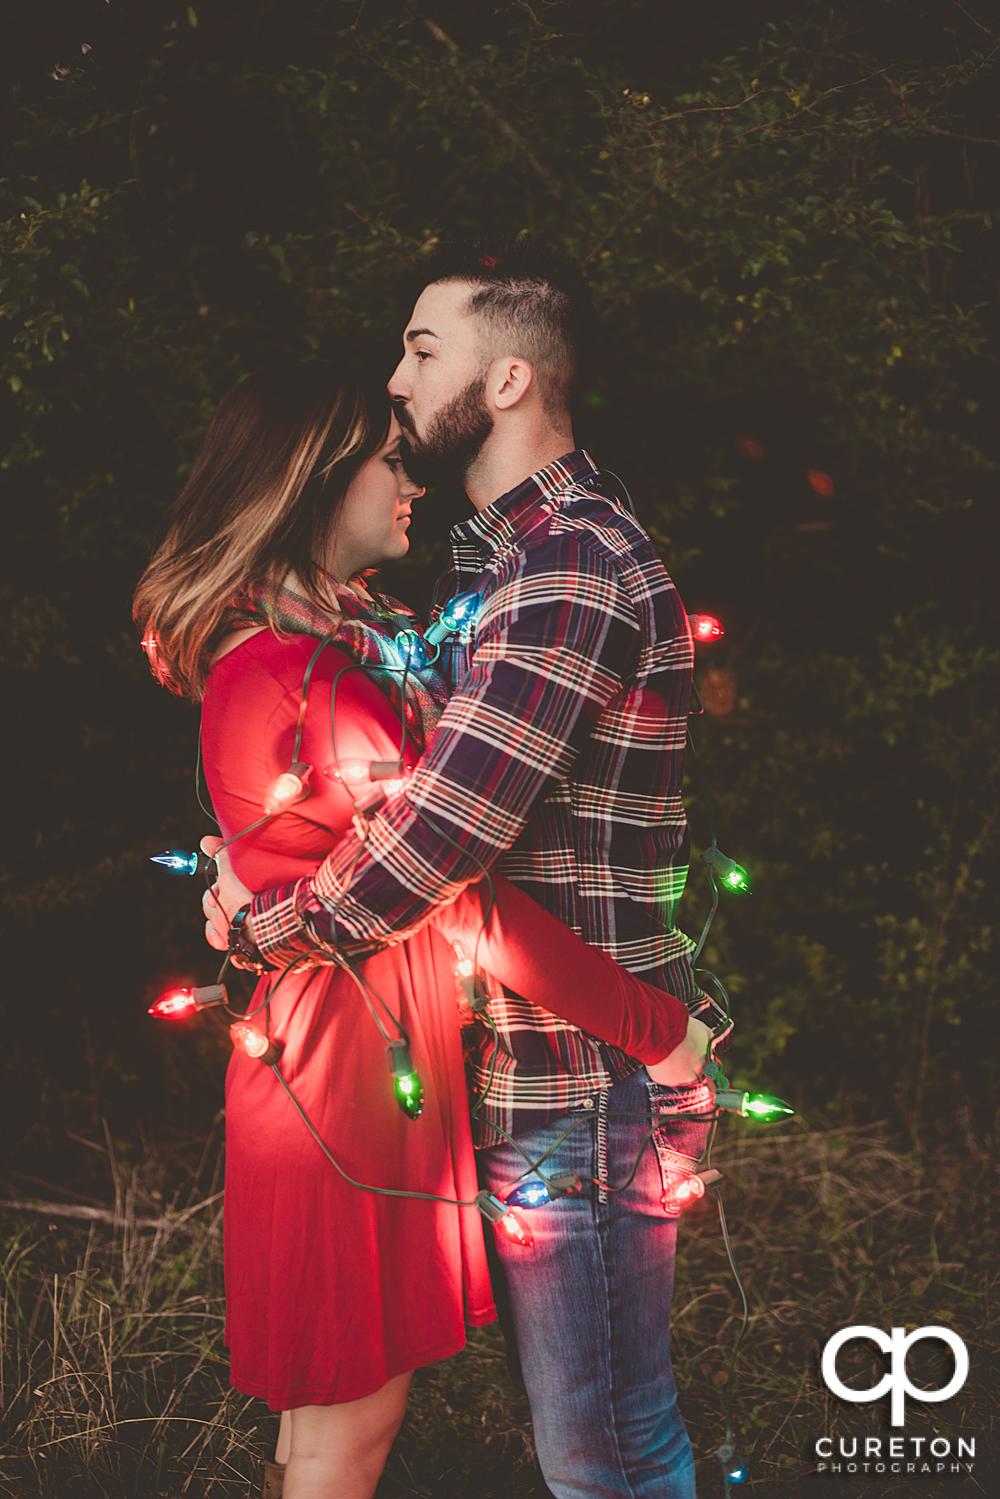 Engaged couple covered in Christmas lights.